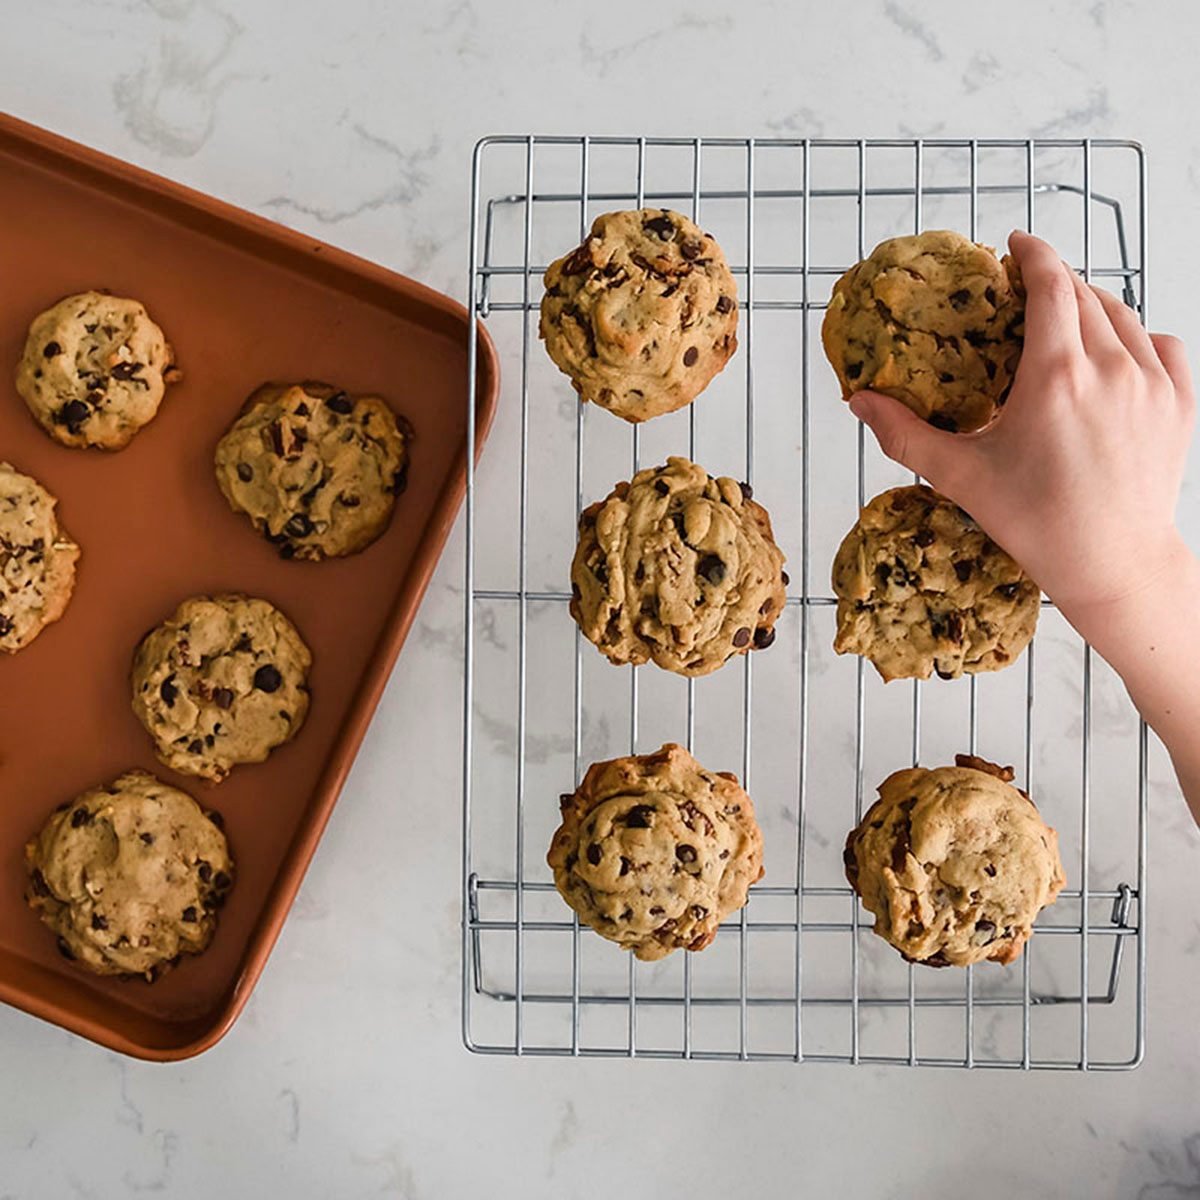 https://www.tasteofhome.com/wp-content/uploads/2020/12/hand-of-young-child-reaching-to-take-a-cookie-off-1140364625.jpg?fit=700%2C700